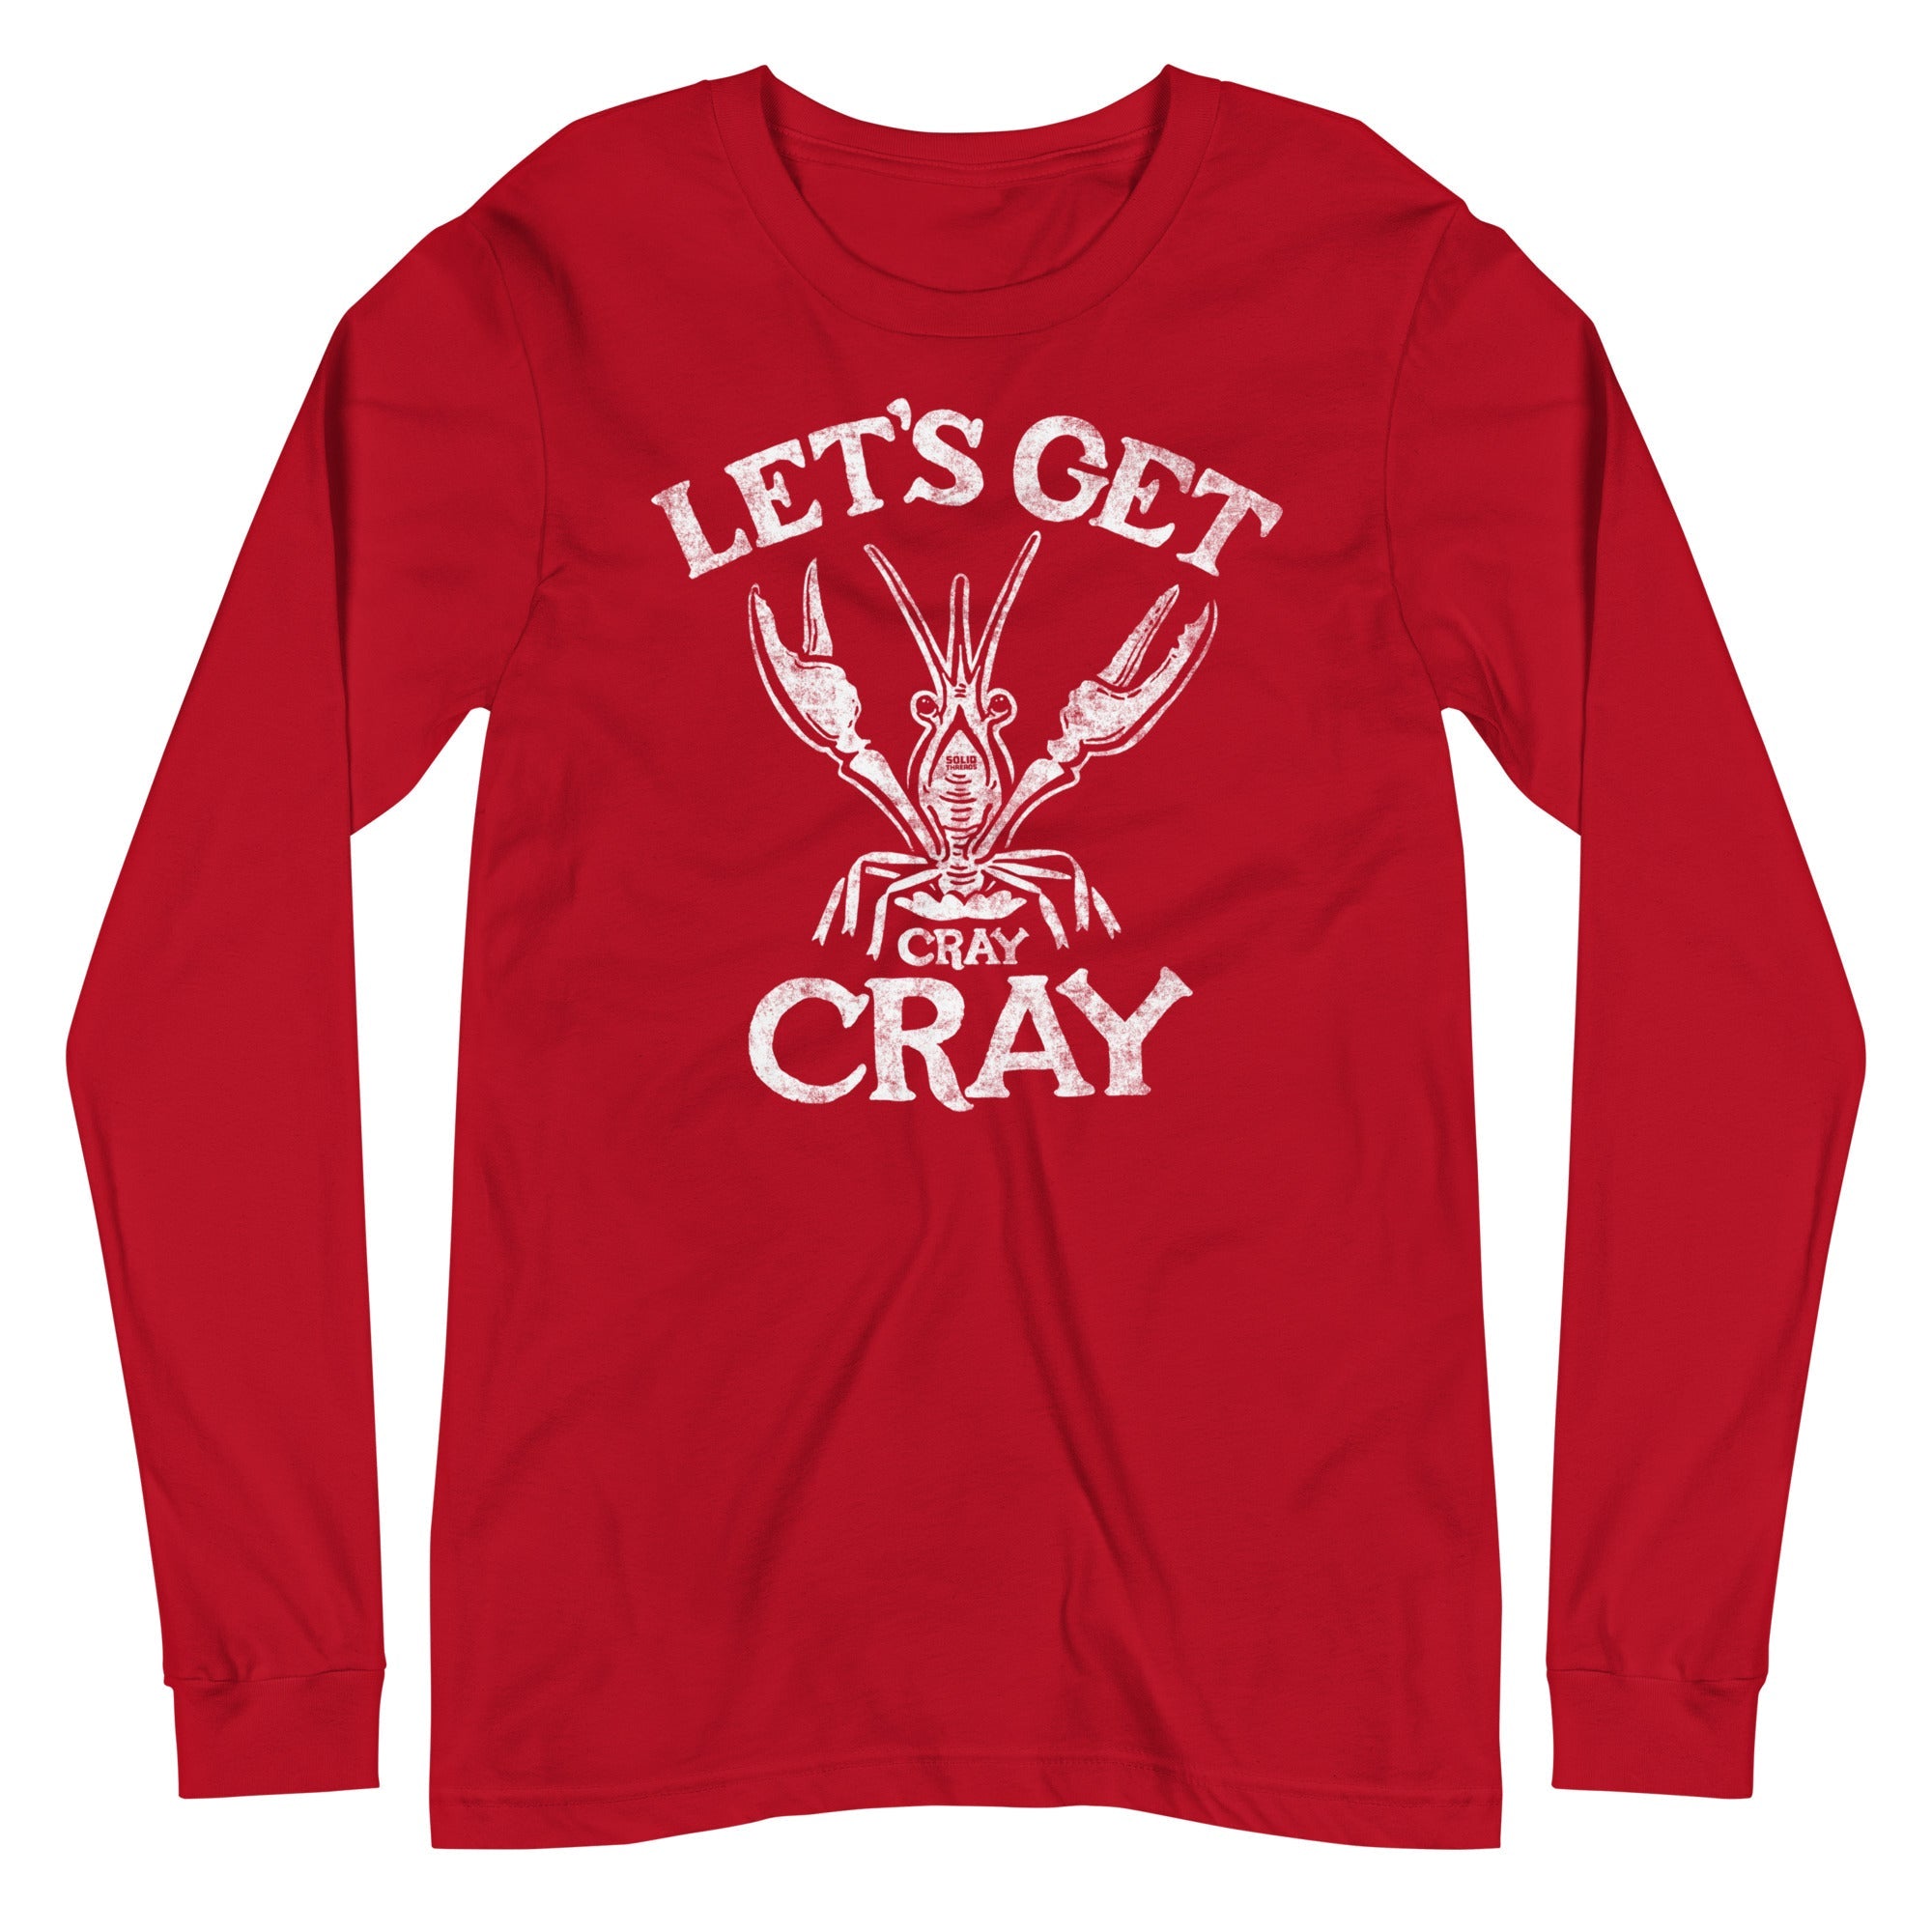 Let's Get Cray Cray Funny Long Sleeve T Shirt | Vintage Seafood Graphic Tee | Solid Threads